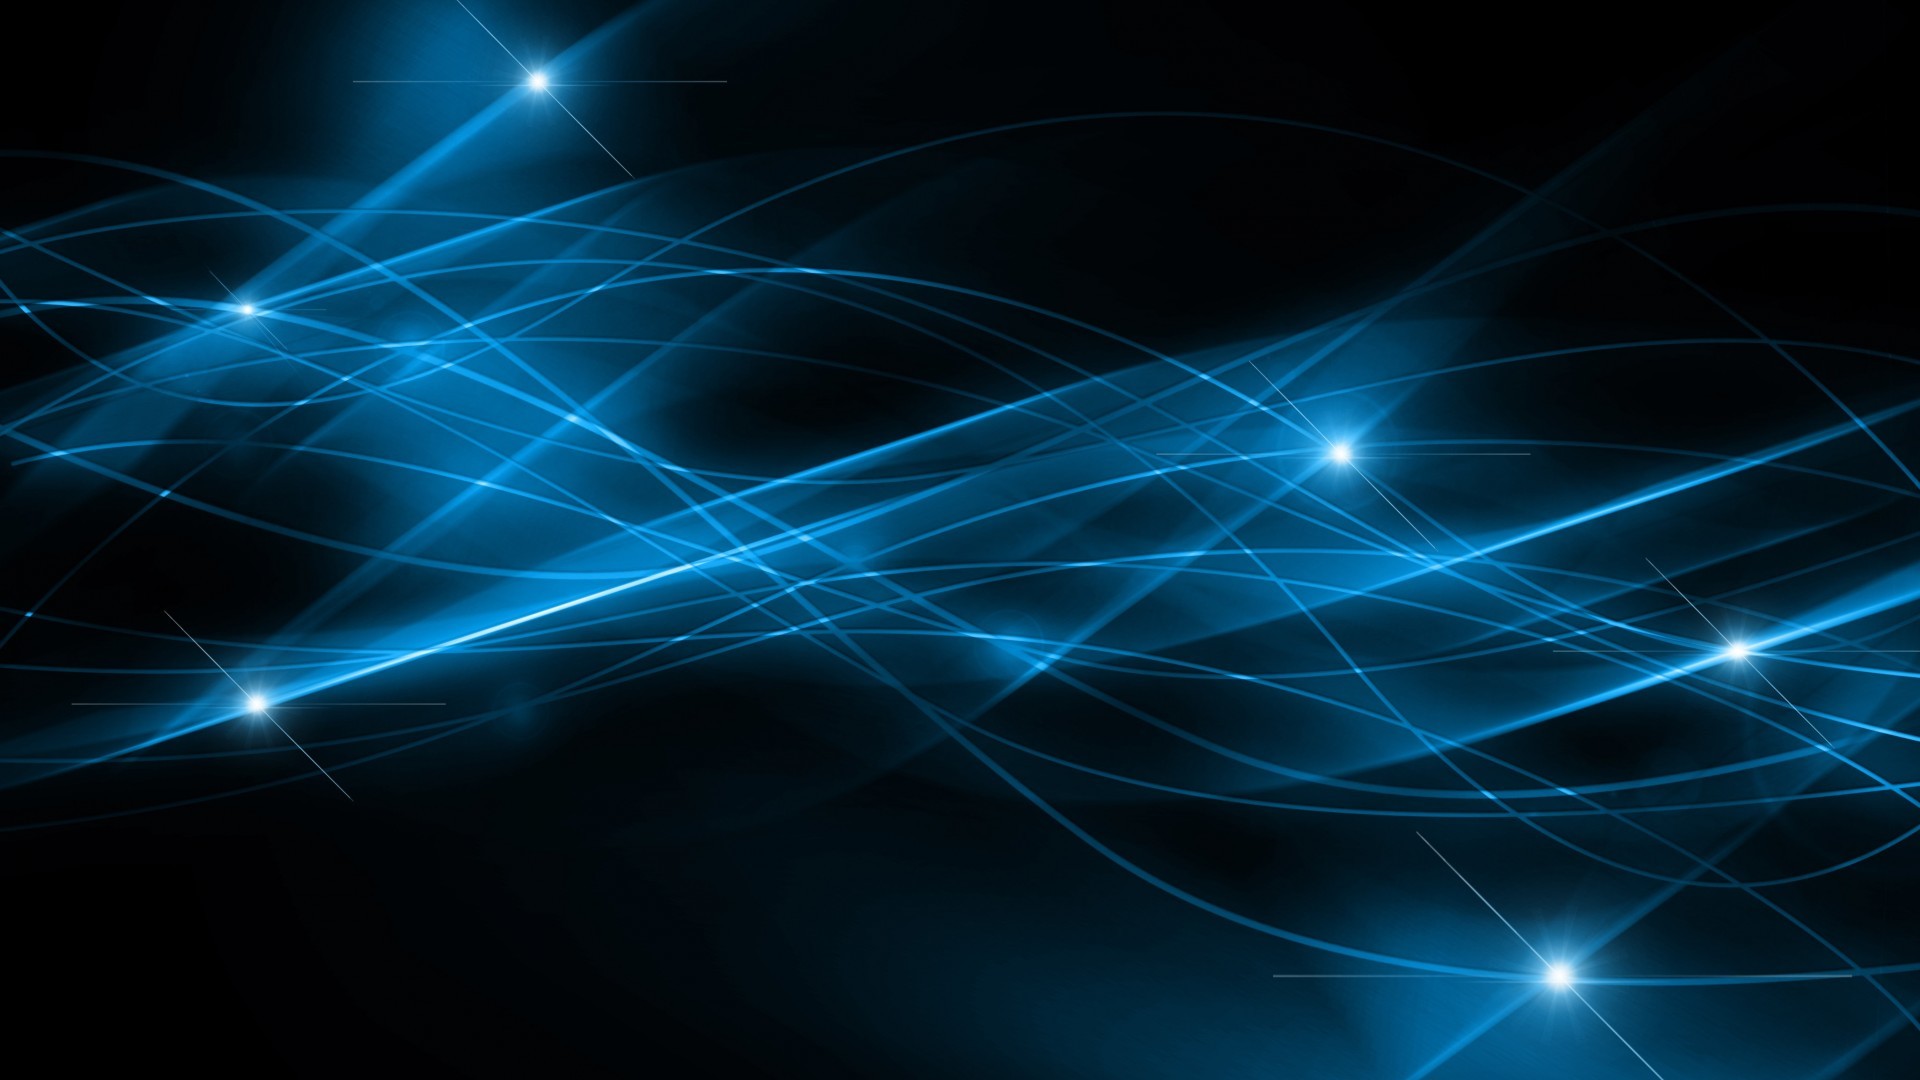 1920x1080 Dark Blue and Black Abstract Wallpaper